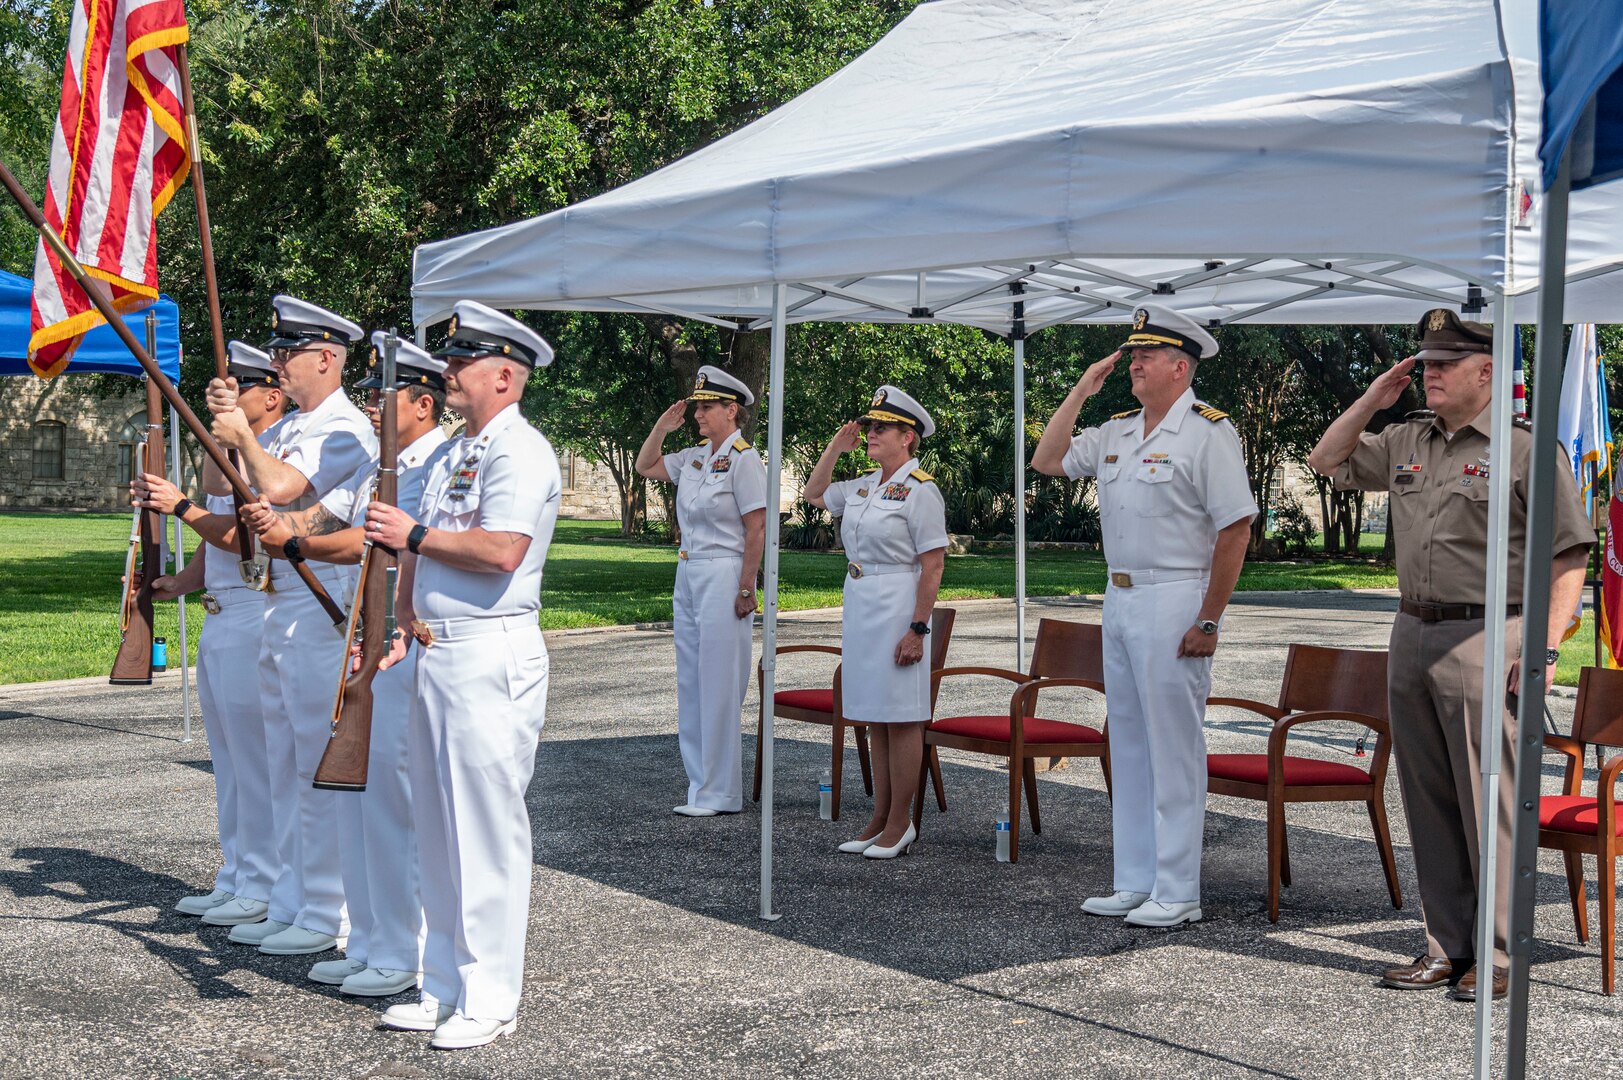 CAPT Walter D. Brafford (2nd from right), incoming commander, salutes during the National Anthem with Rear Adm. Cynthia A. Kuehner (2nd from left), Rear Adm. Anne Swap (left) and Army Lt. Gen. John P. Evans Jr.